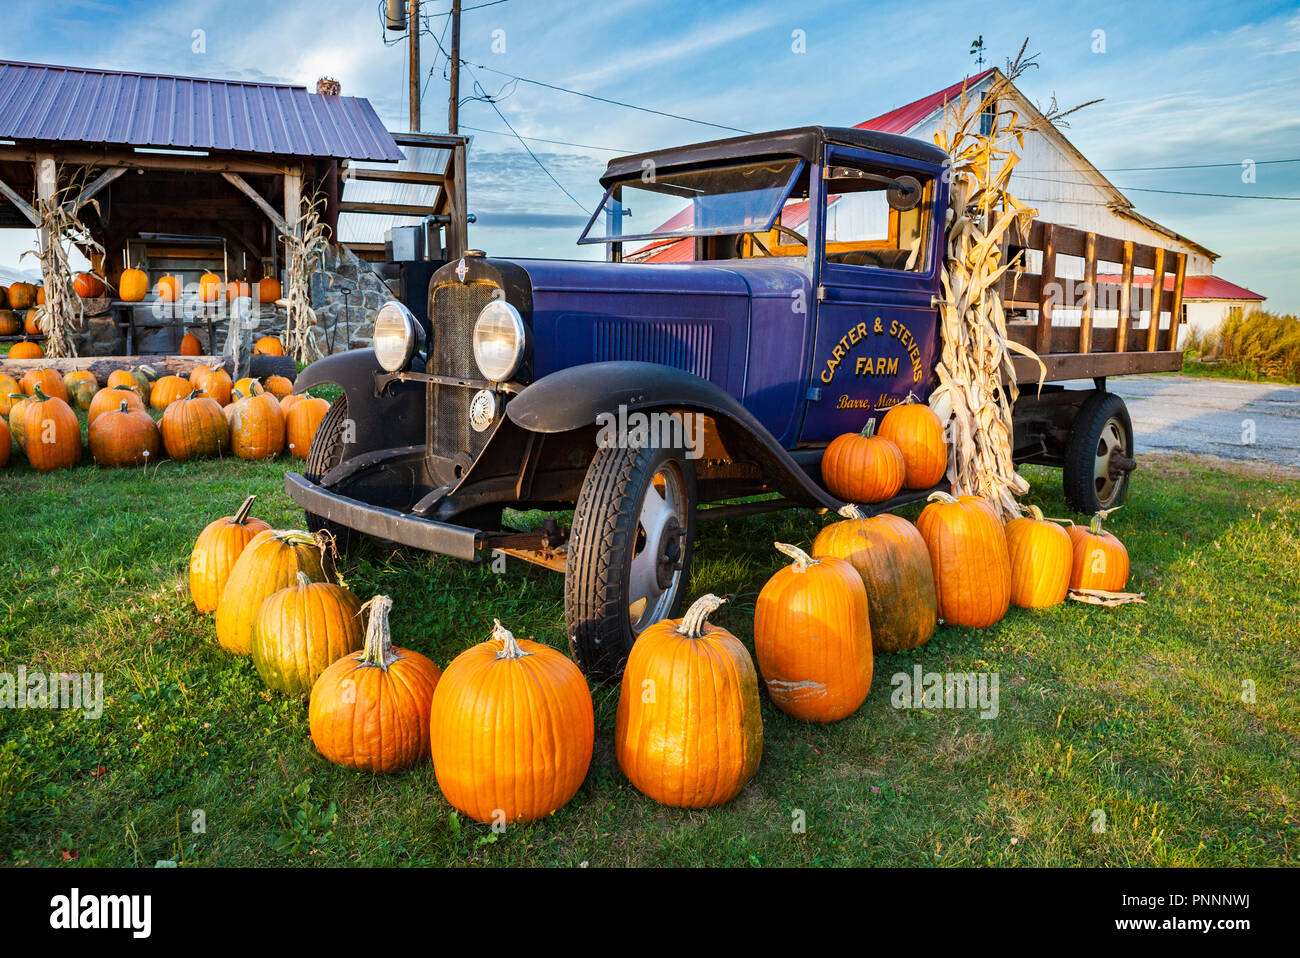 An Antique Chevrolet Truck Surrounded By Pumpkins At A Barre Ma Farm Stand Stock Photo Alamy